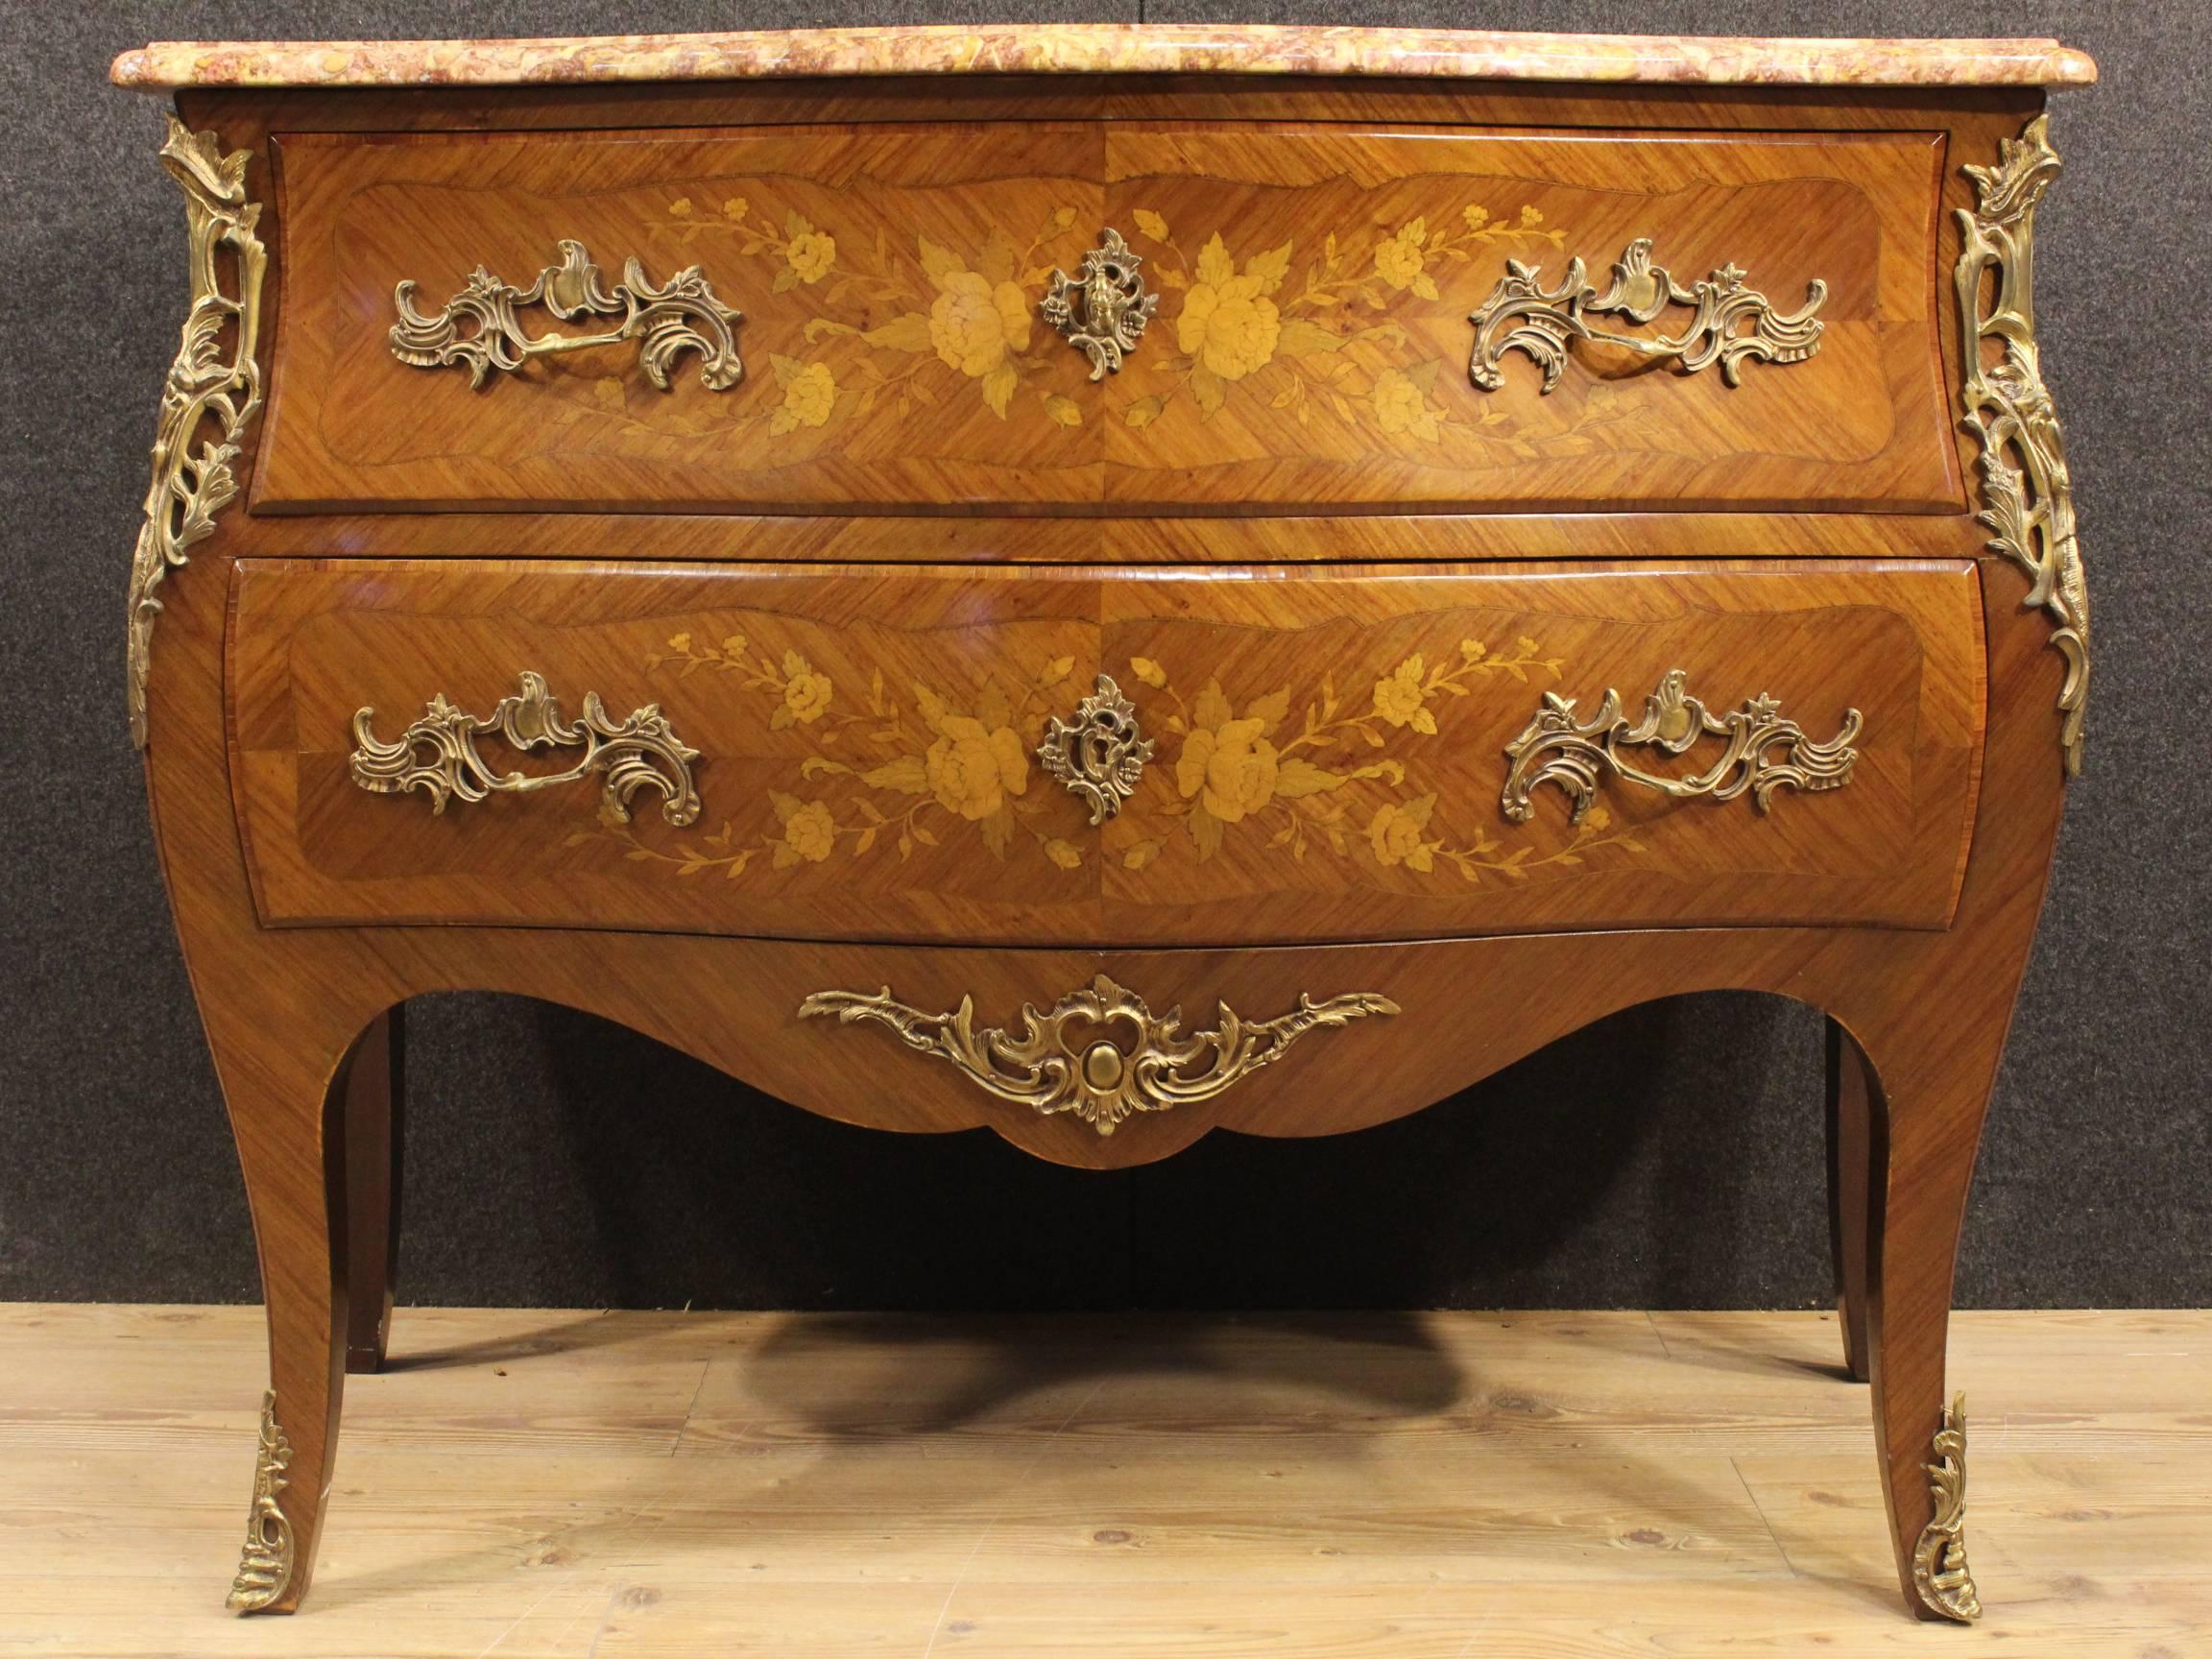 French dresser richly inlaid in rosewood, maple and fruitwood with floral motifs. Furniture with two drawers of good capacity and service adorned with gilt and chiseled bronze. Top in original marble in perfect condition. Chest of drawers of the